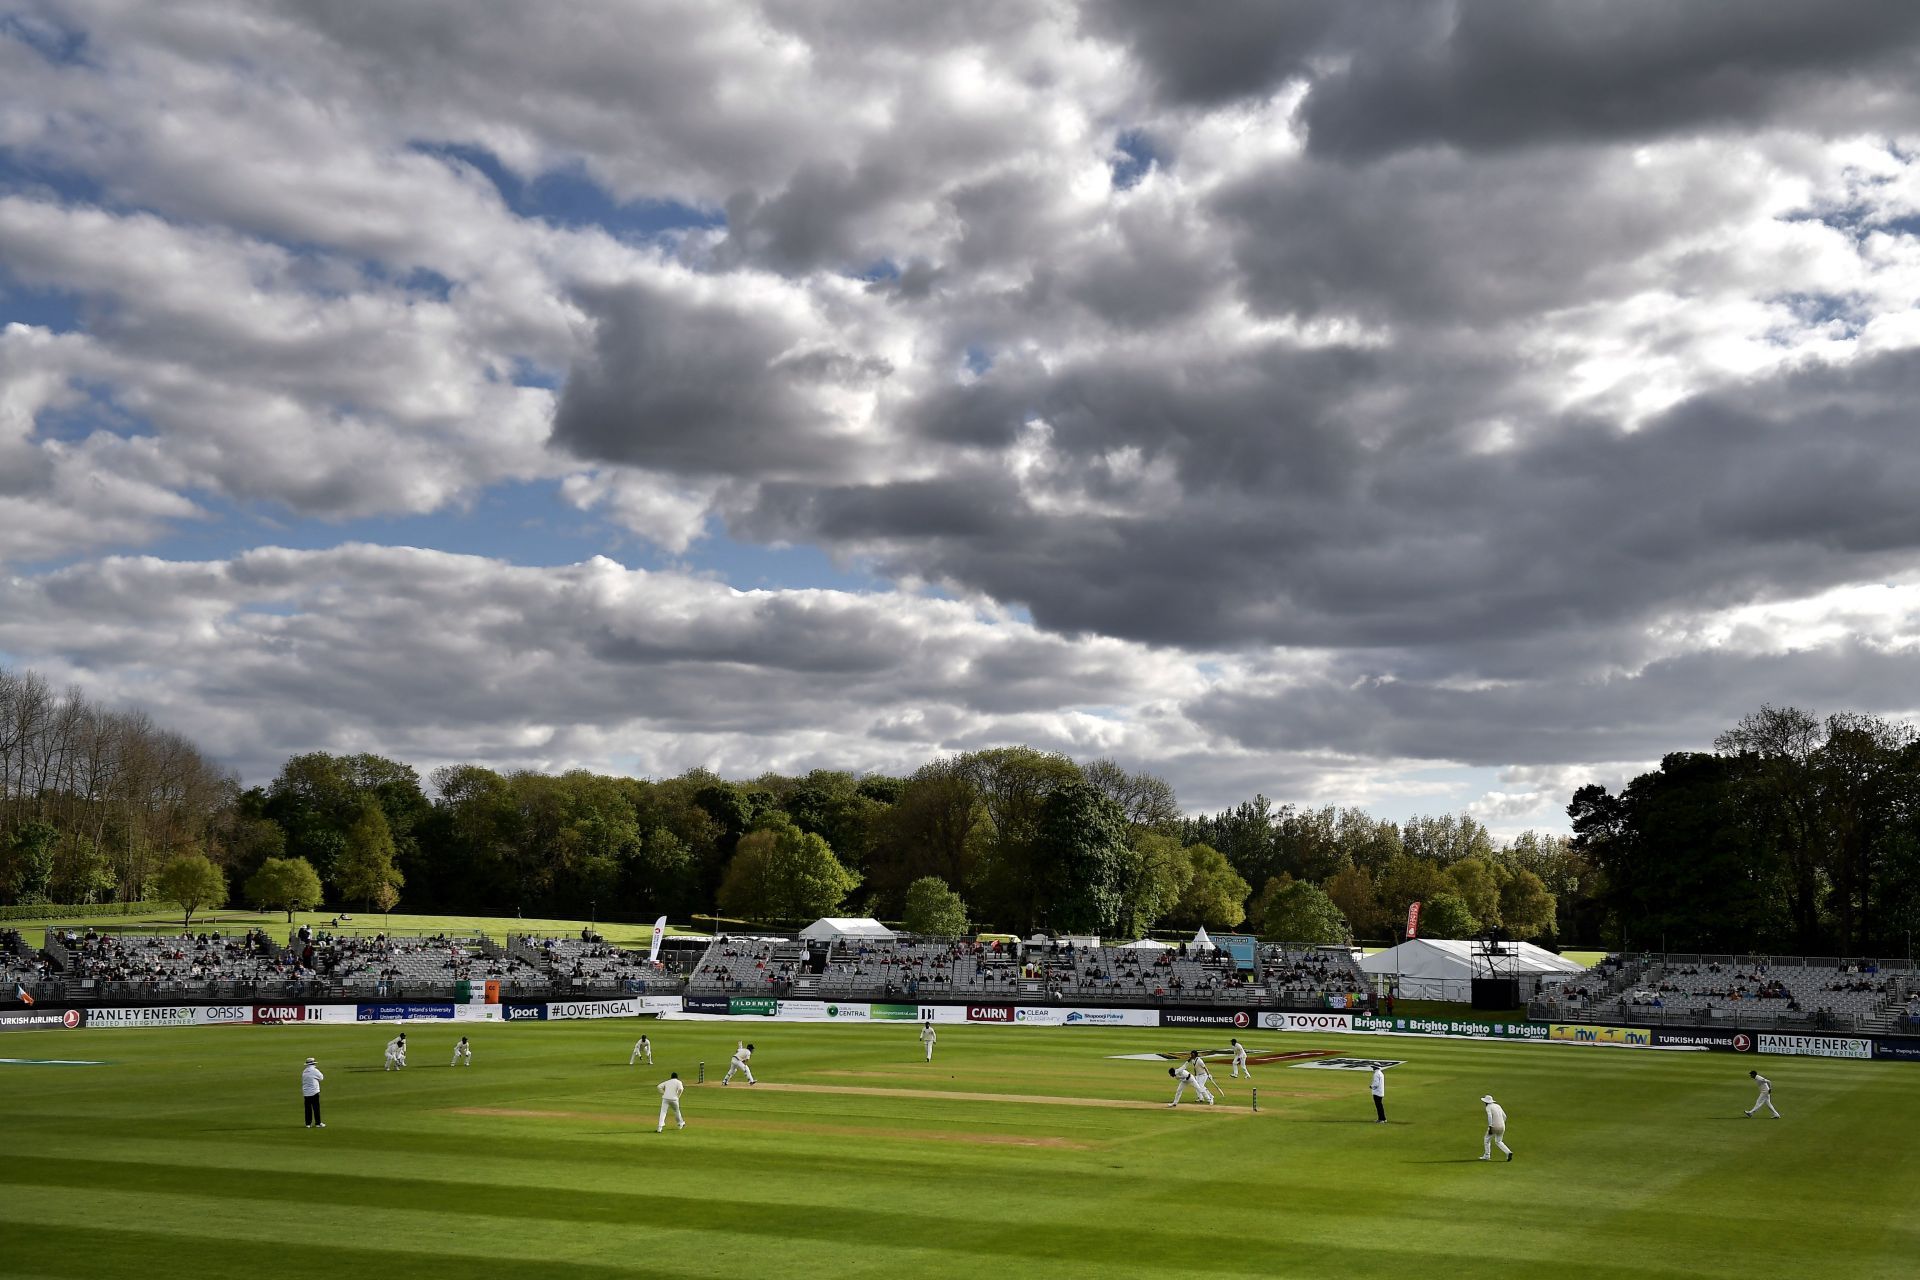 Dublin will host the 2nd T20I of the series between India and Ireland.